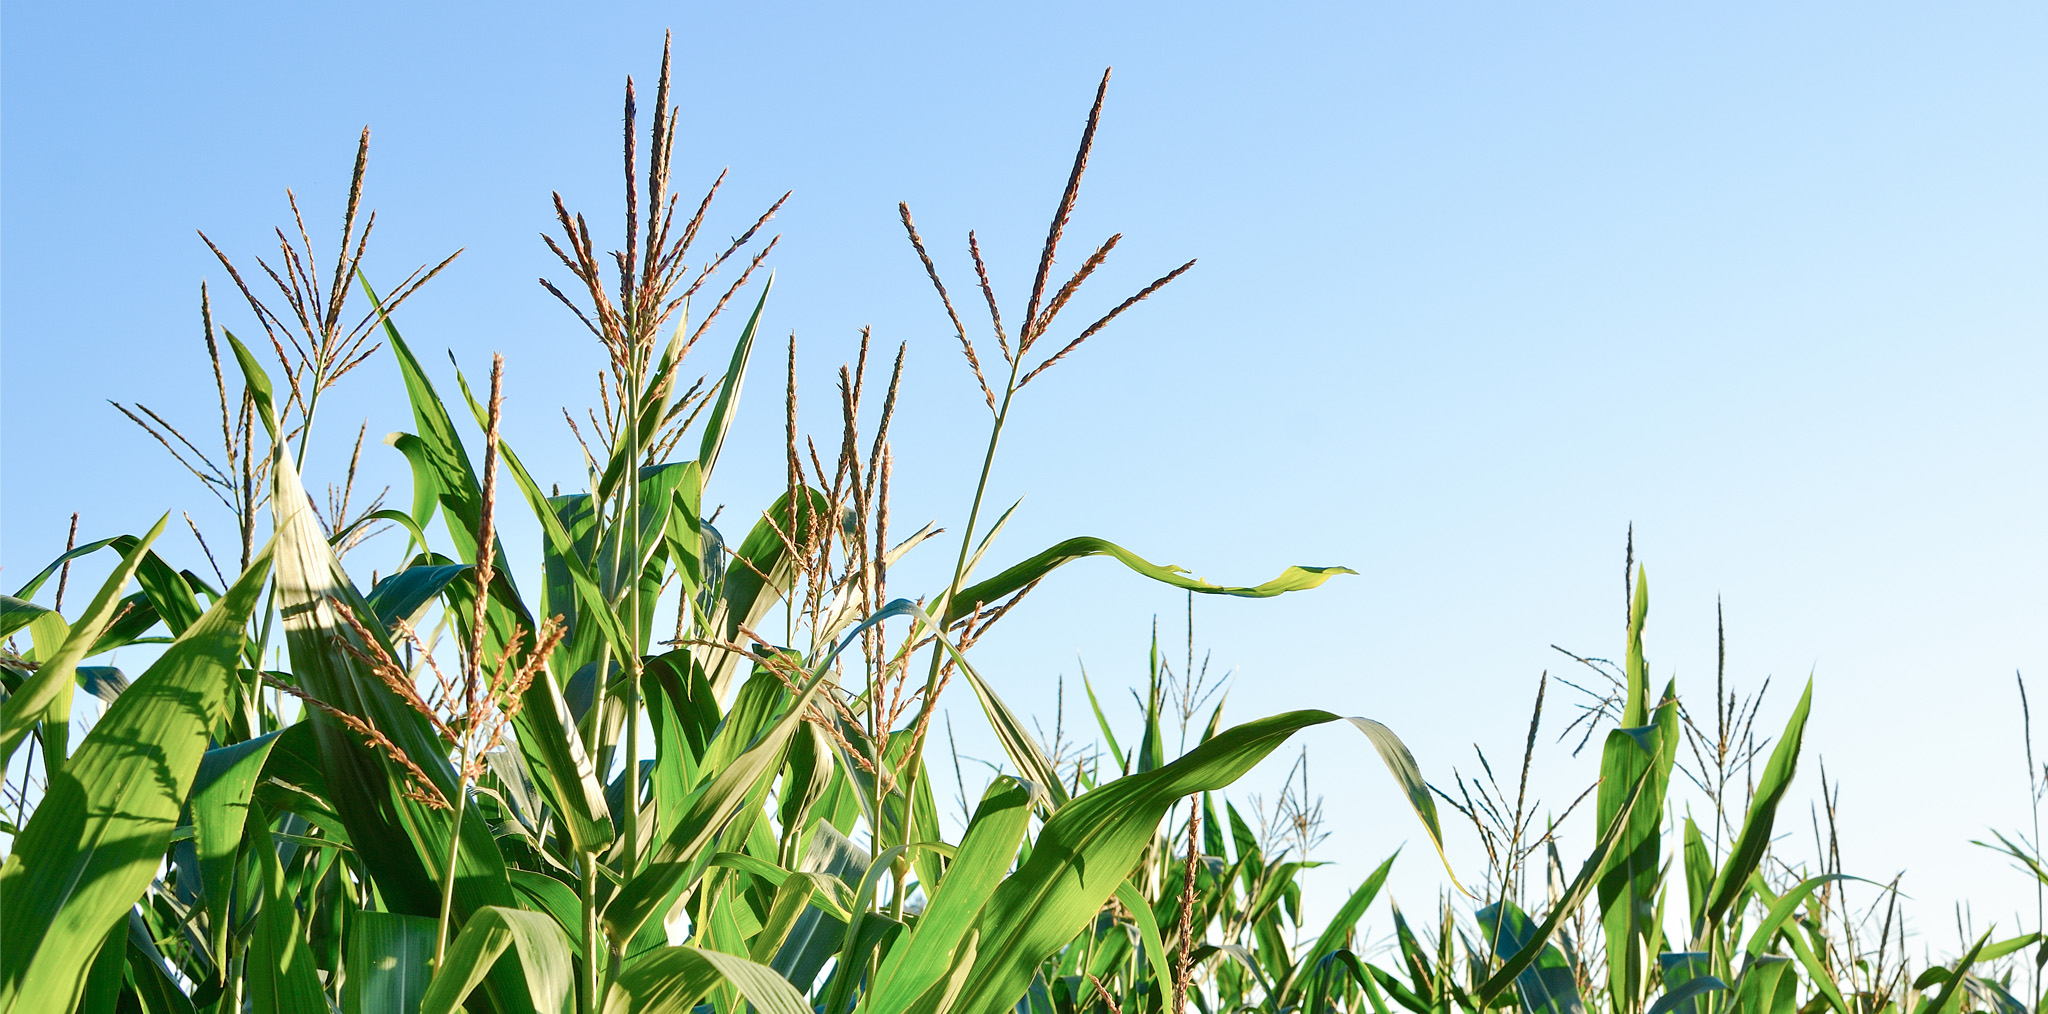 Maize crop with tassels against a blue sky